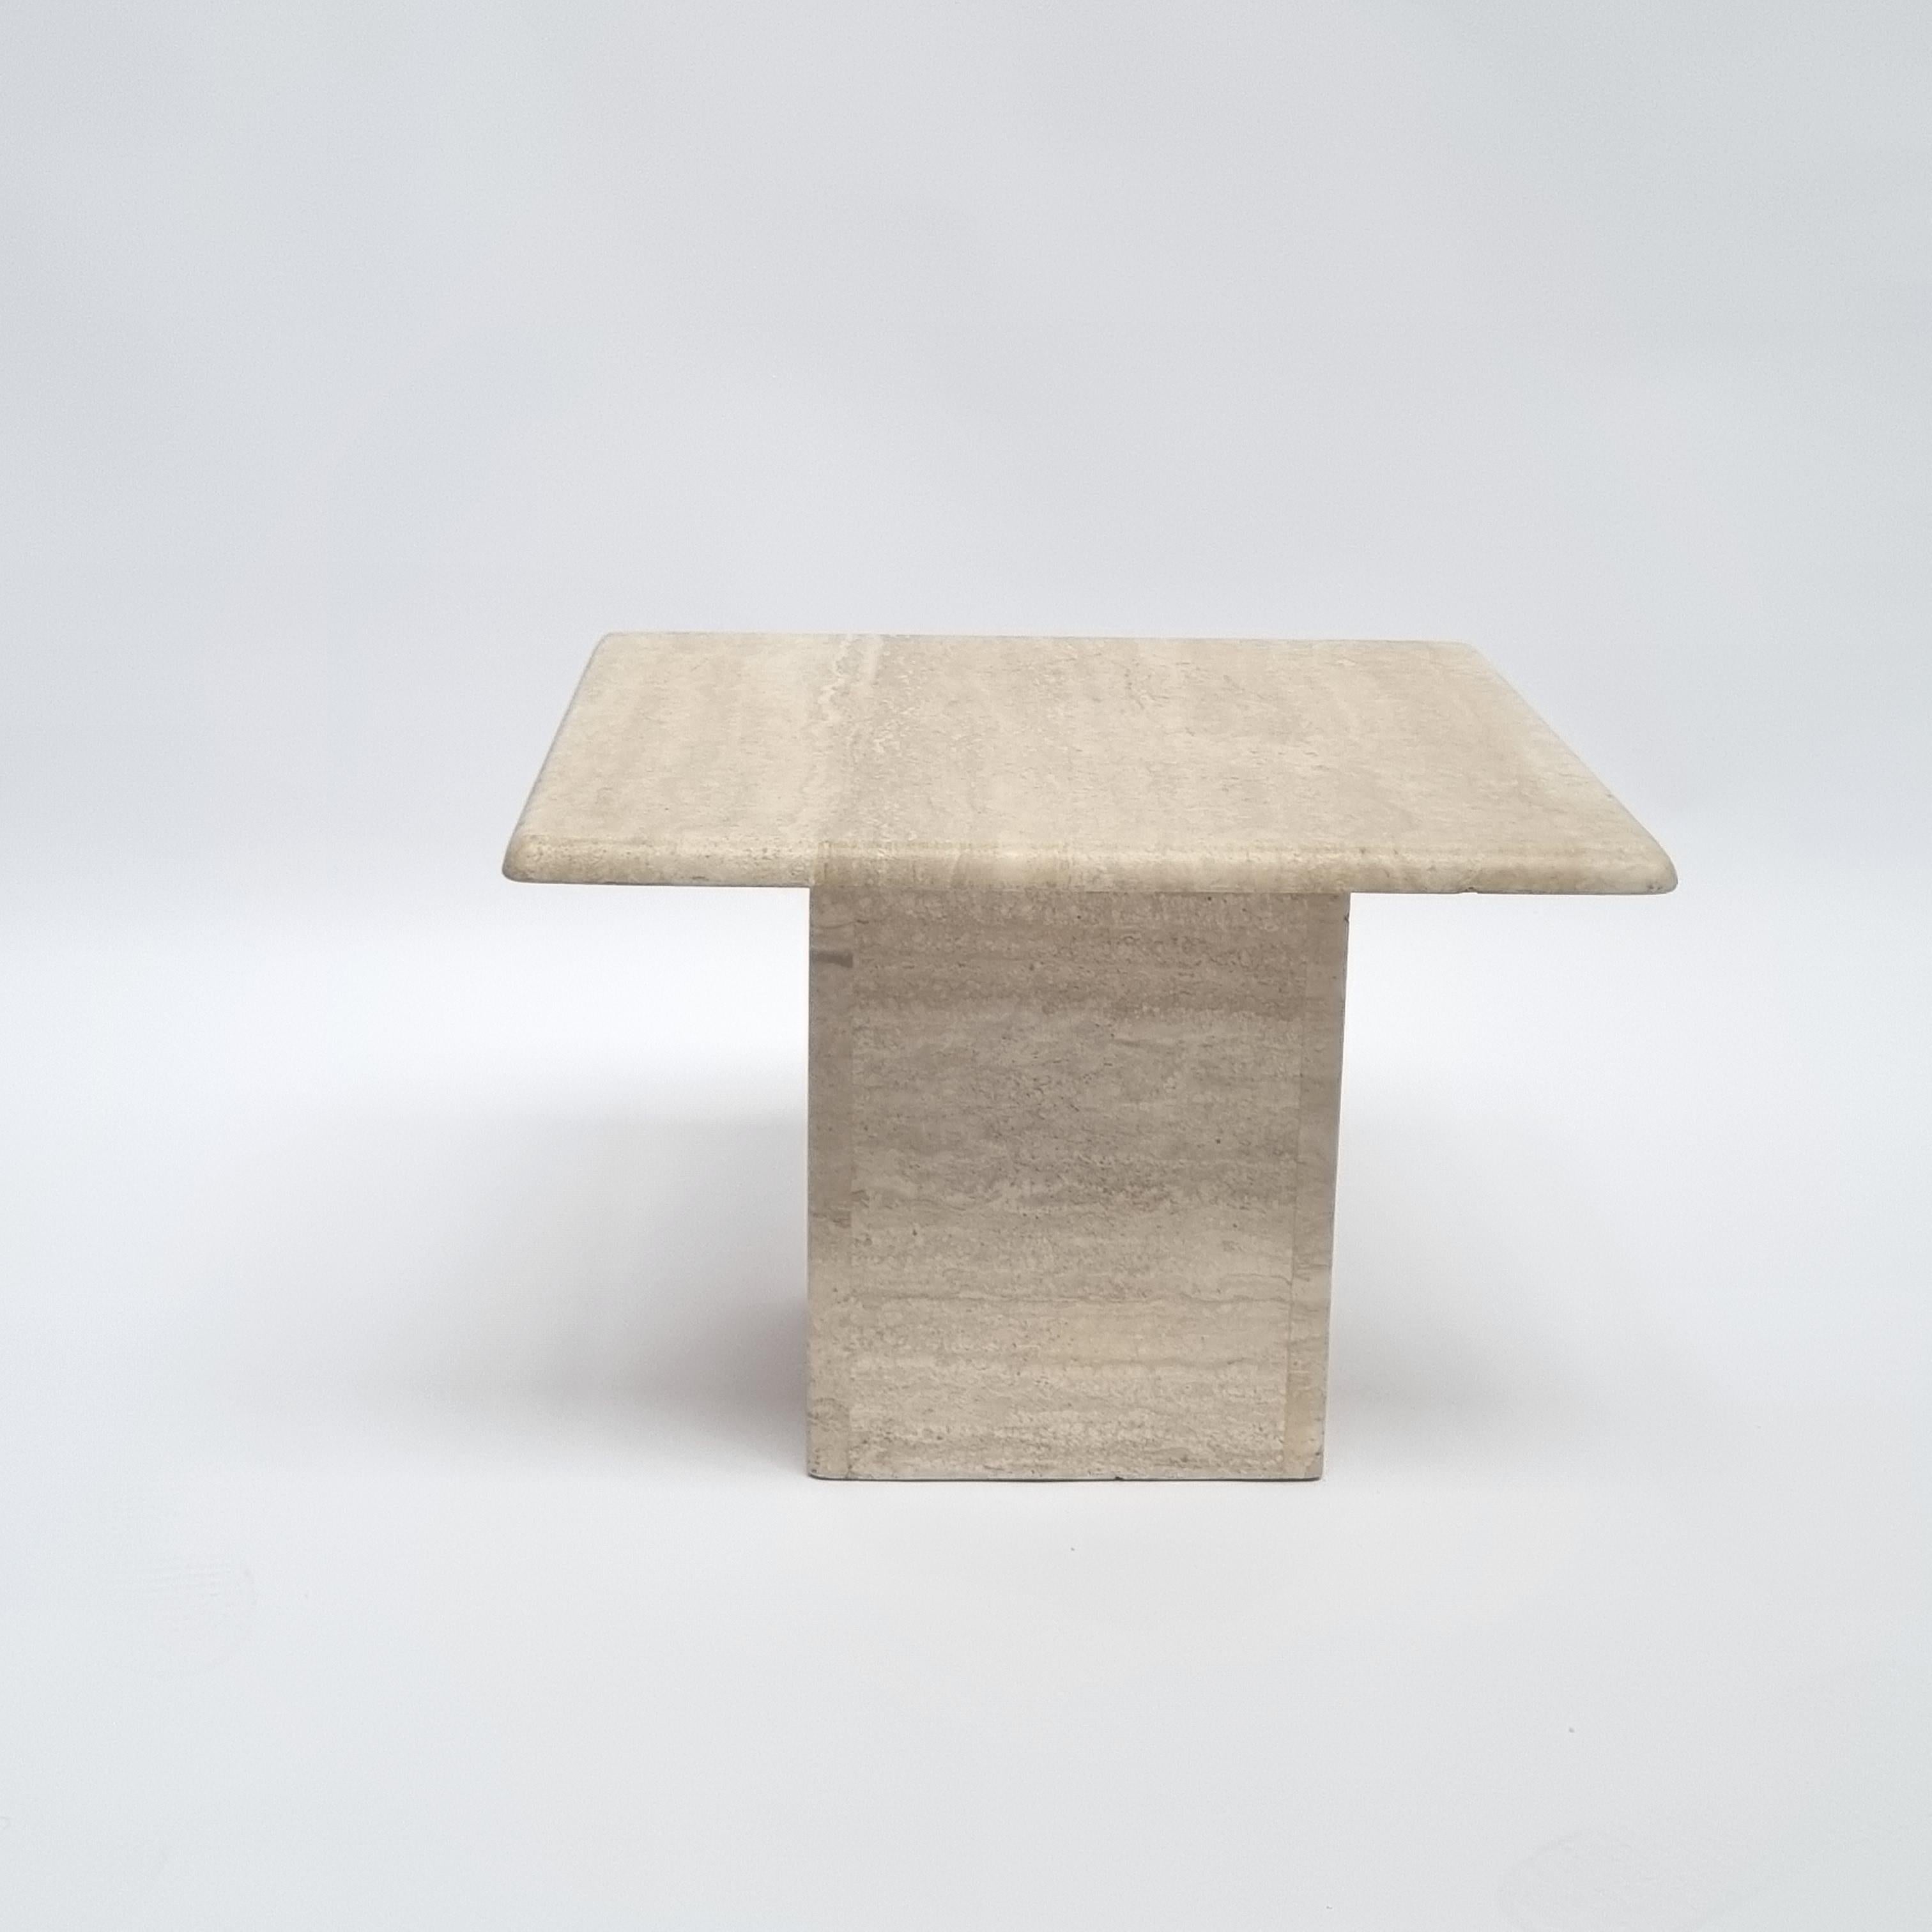 Coffee table out of Travertine, 1970s, Italy. Measures: W 45 x D 45 x H 38.